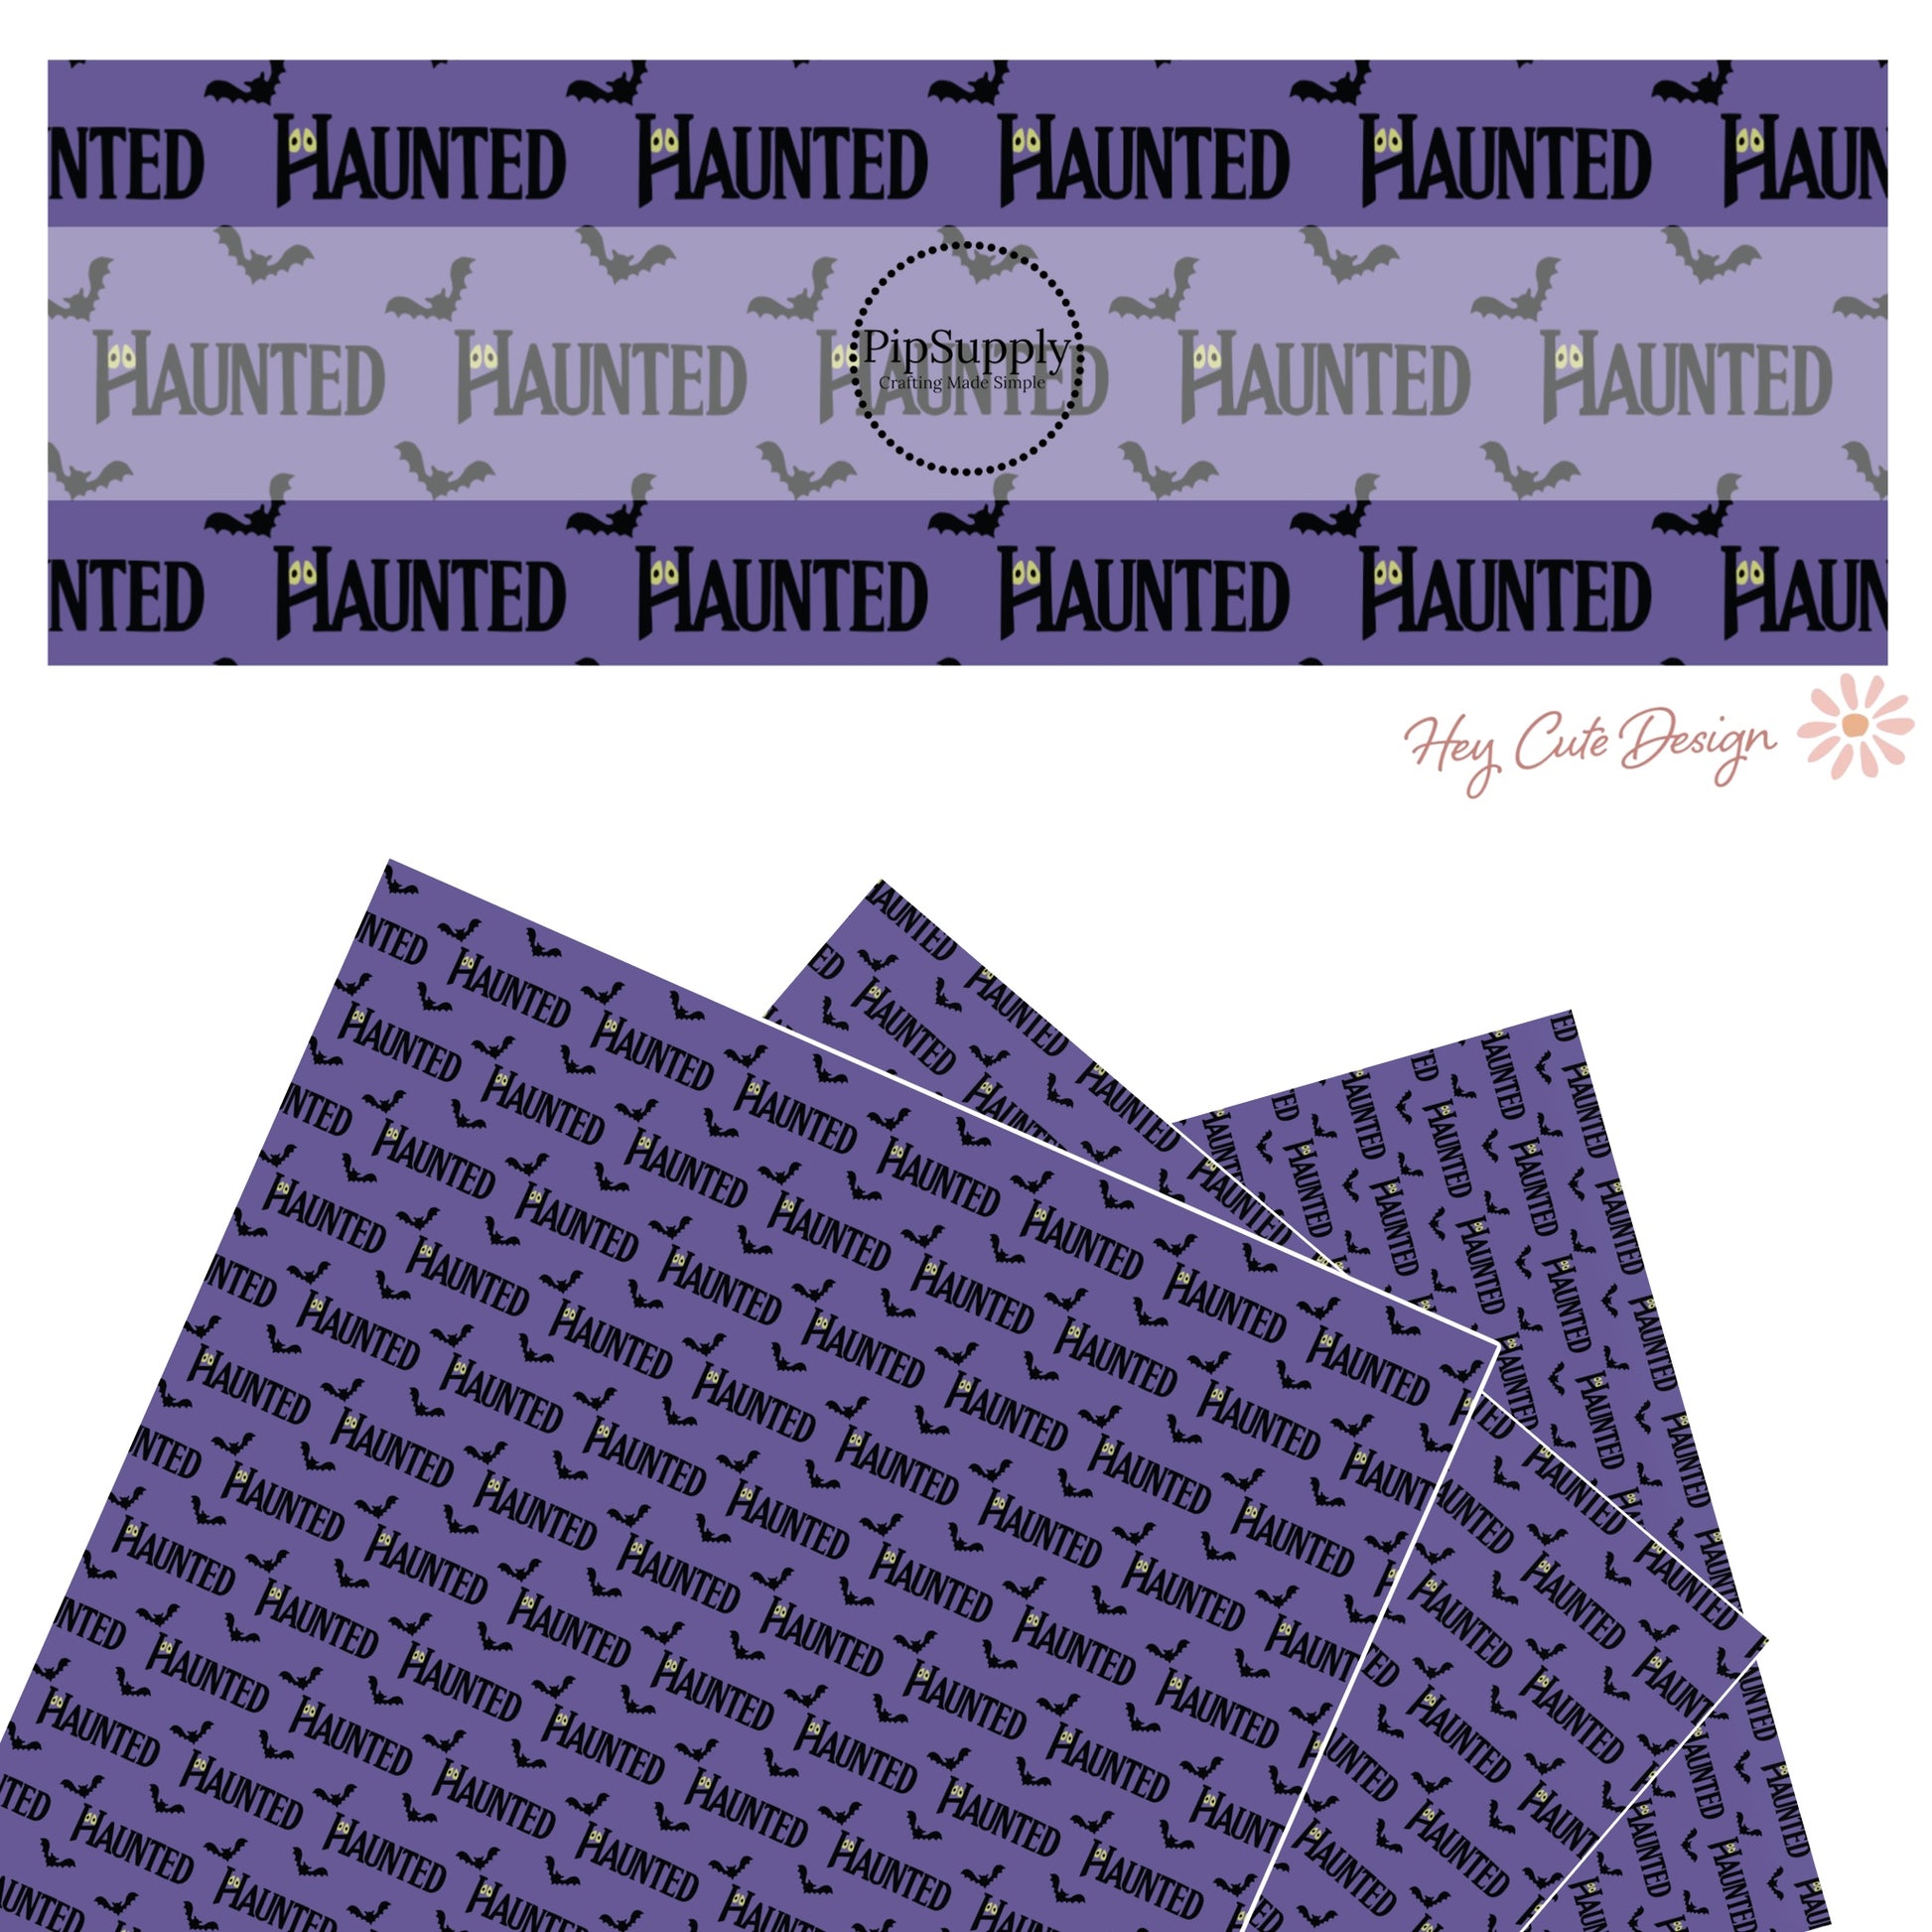 Black haunted with eyes and bats on purple faux leather sheets